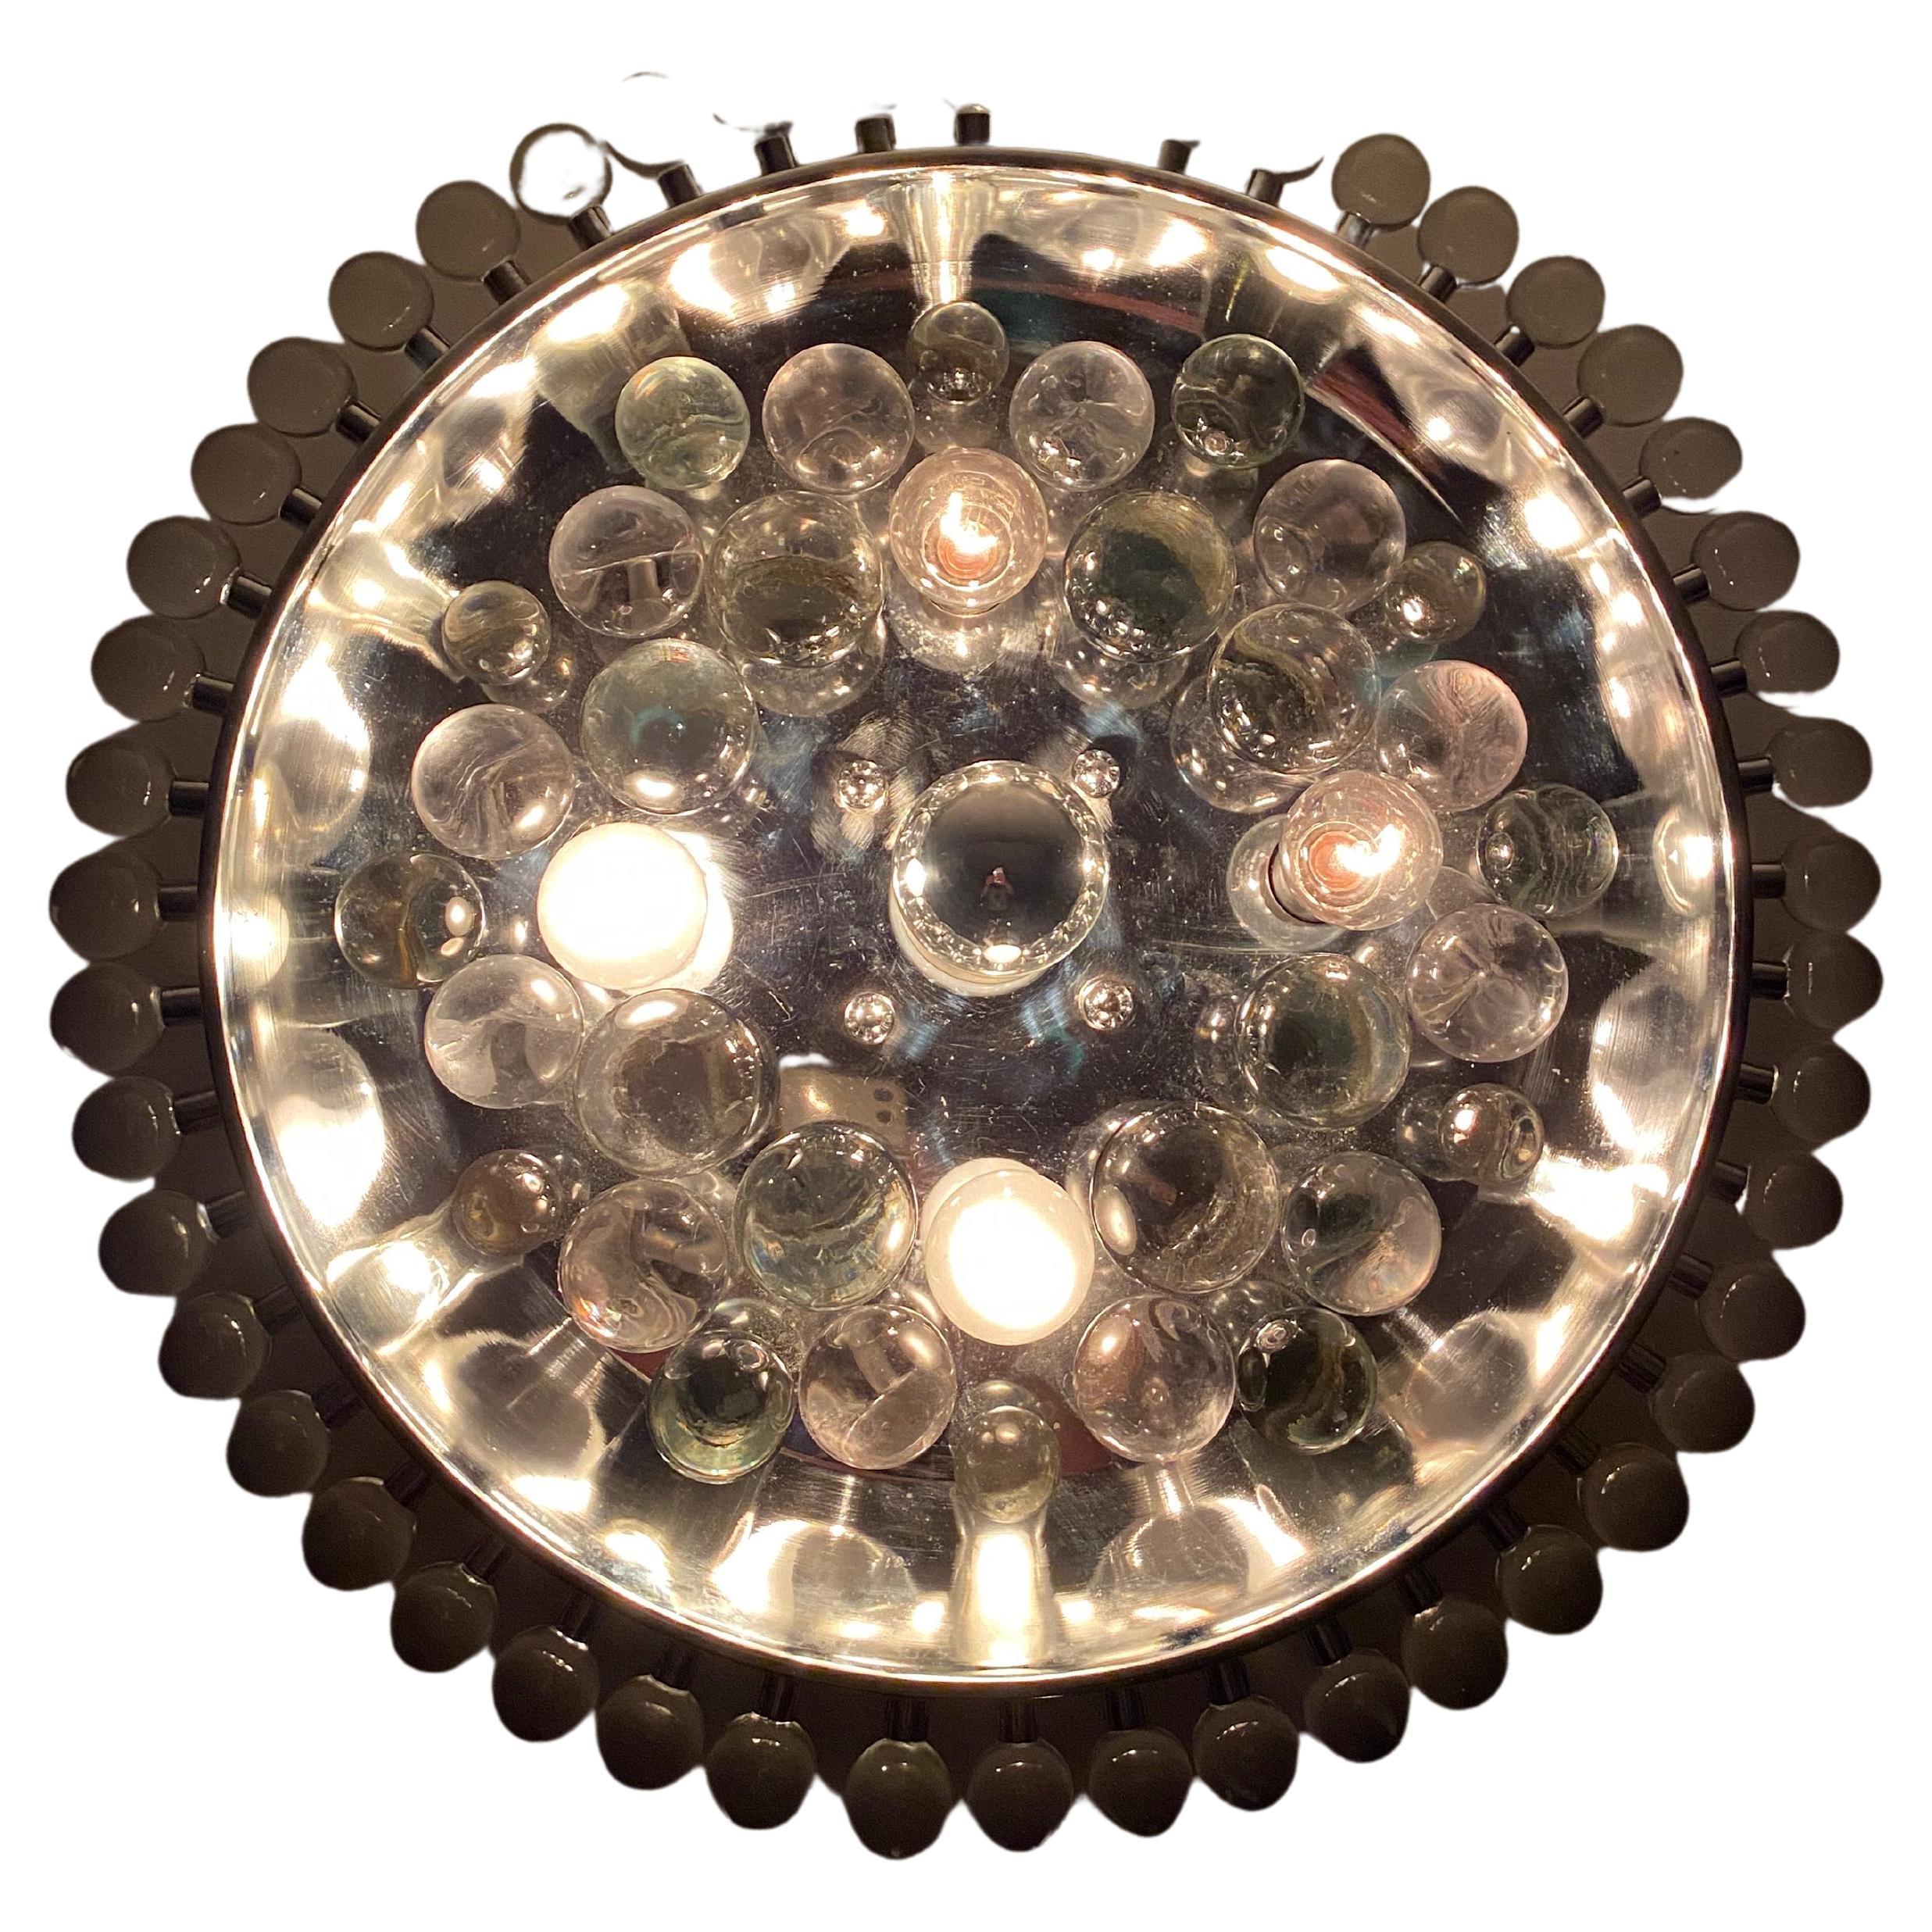 Large Space Age flush mount or wall light.
Manufactured in Italy during the 1960’s in chromed metal and glass spheres in a shape reminiscent of a flying saucer. 
This lamp was most likely produced by Sciolari or Stilkronen.
Takes 4 E14 and 1 E27